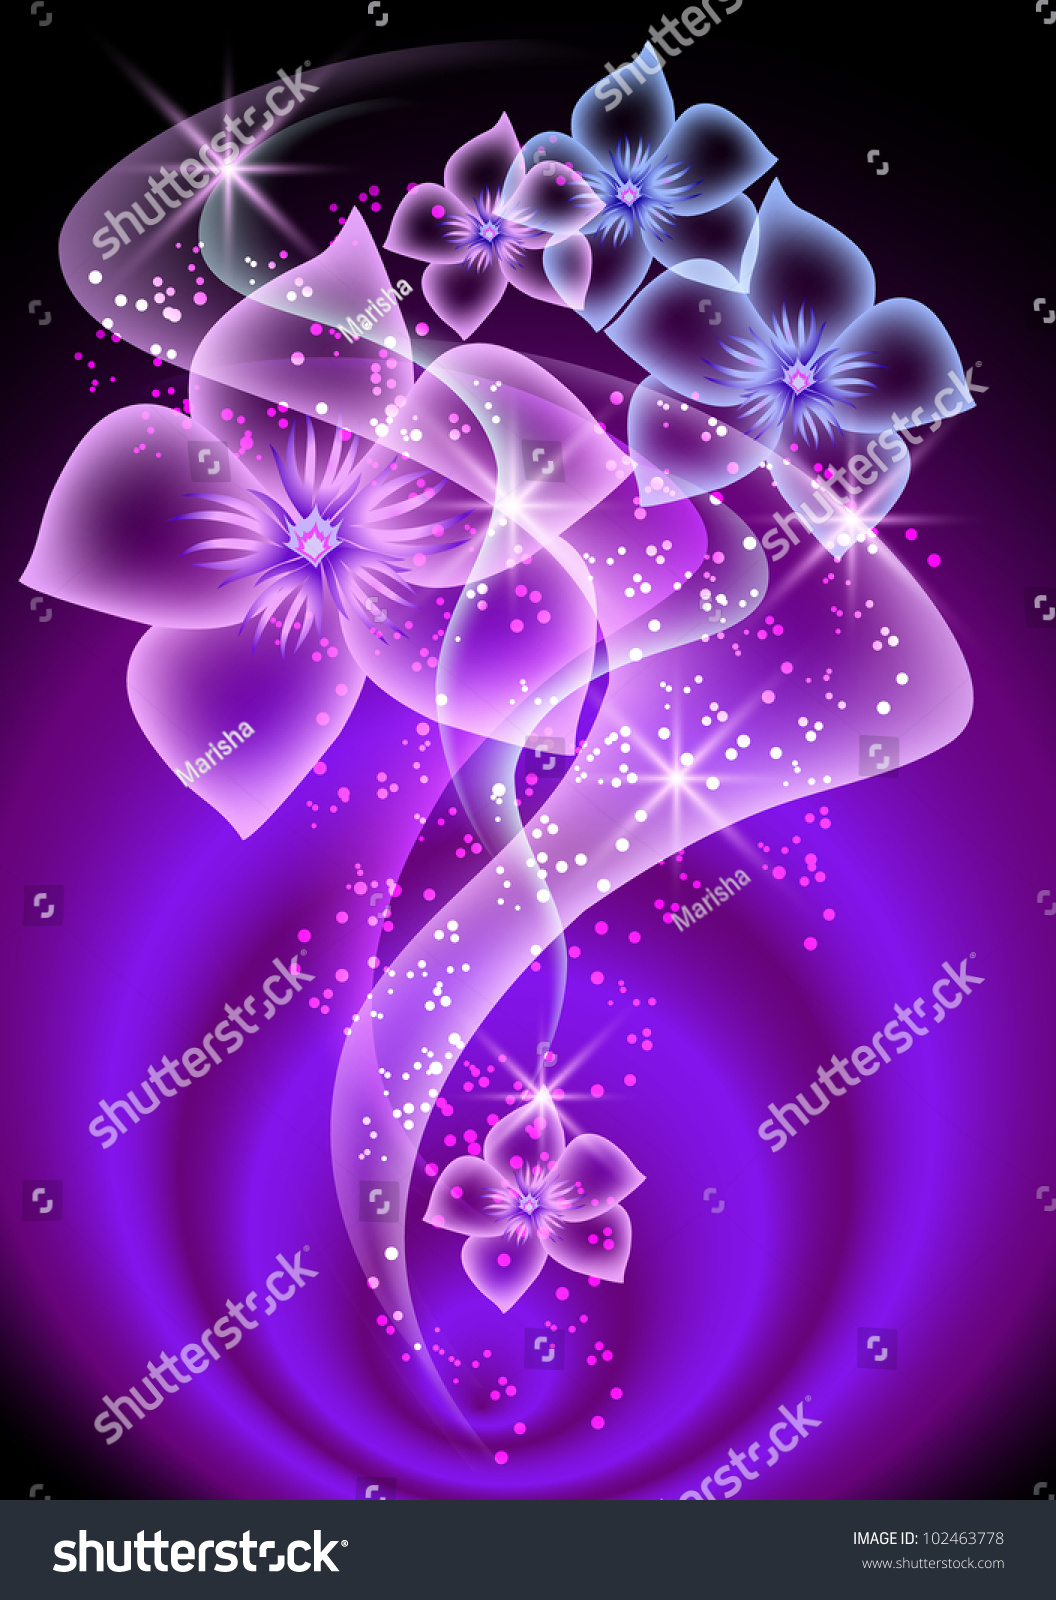 Glowing Background With Smoke And Transparent Flowers Stock Vector